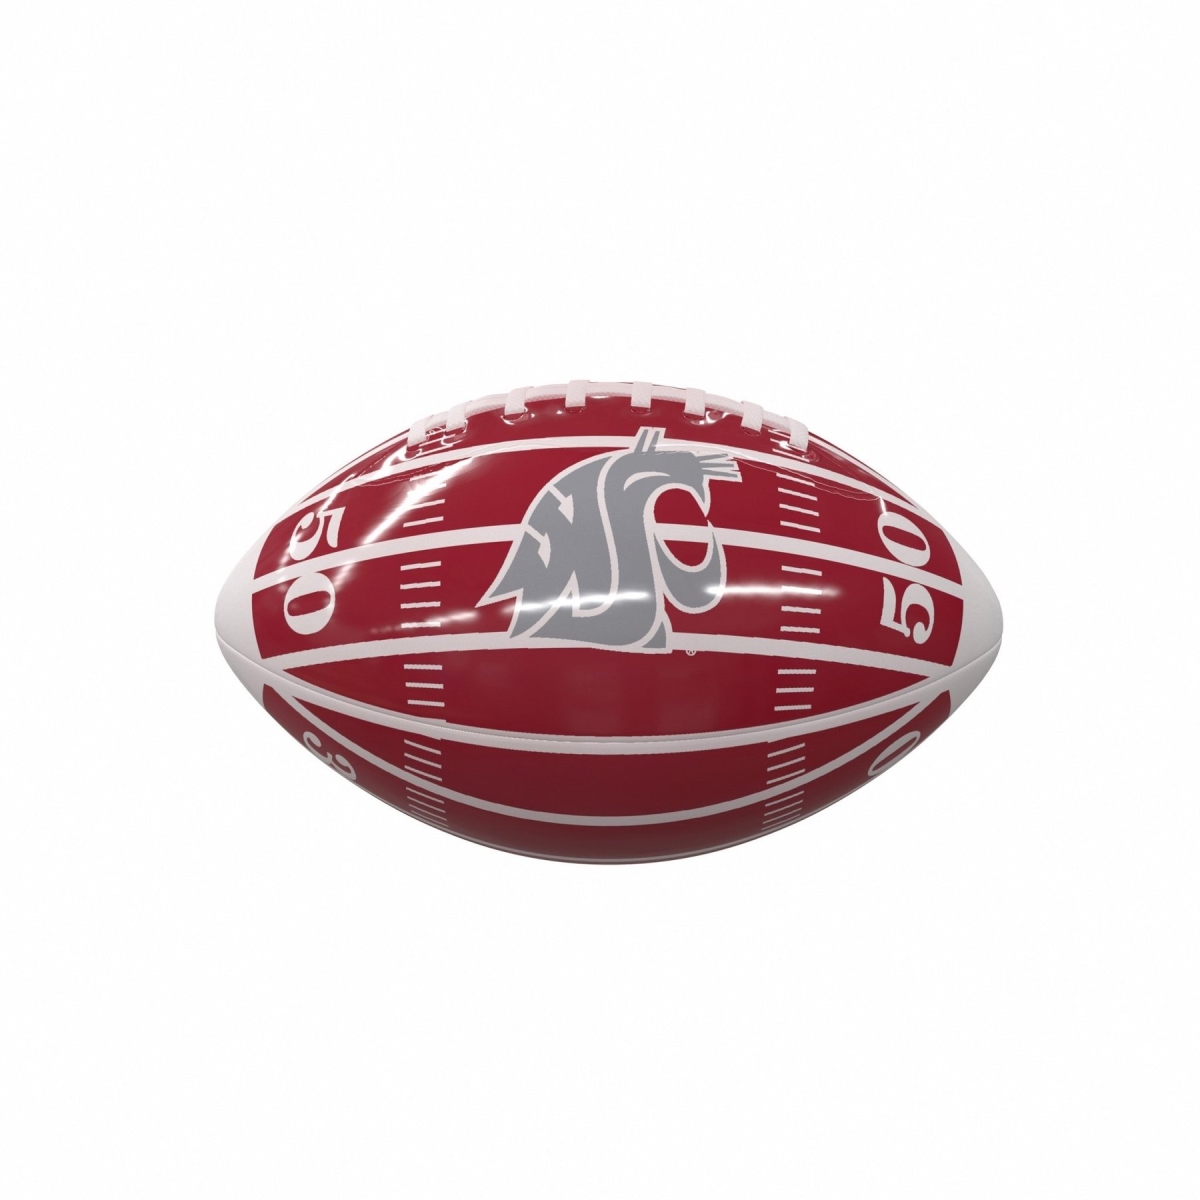 Picture of Logo Chair 238-93MG-2 Western Australia State Soccer Field Mini-Size Glossy Football